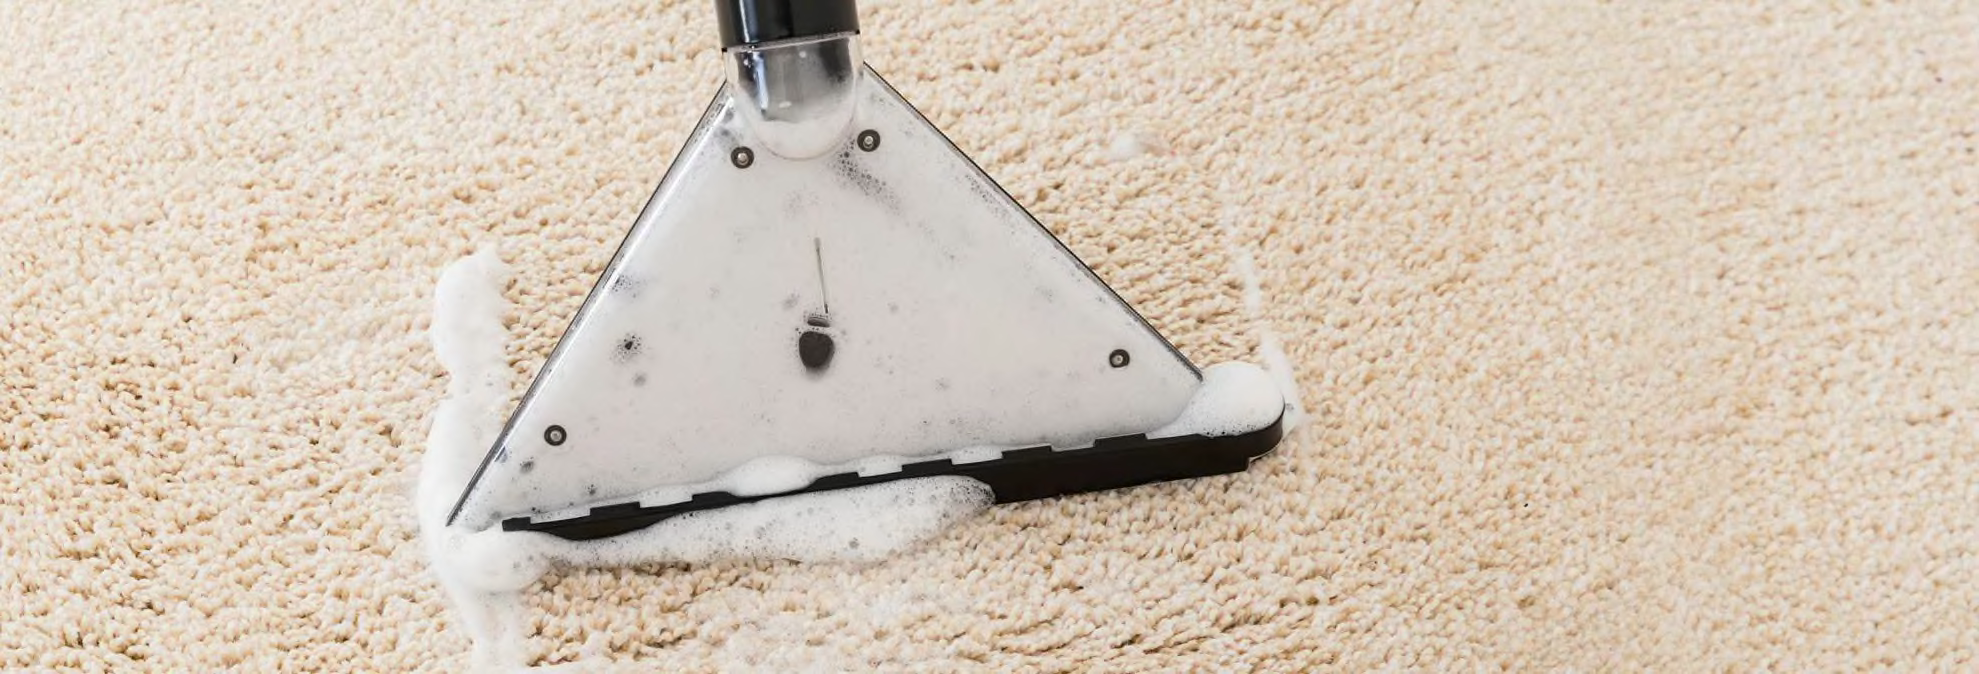 Carpet Cleaner Buying Guide